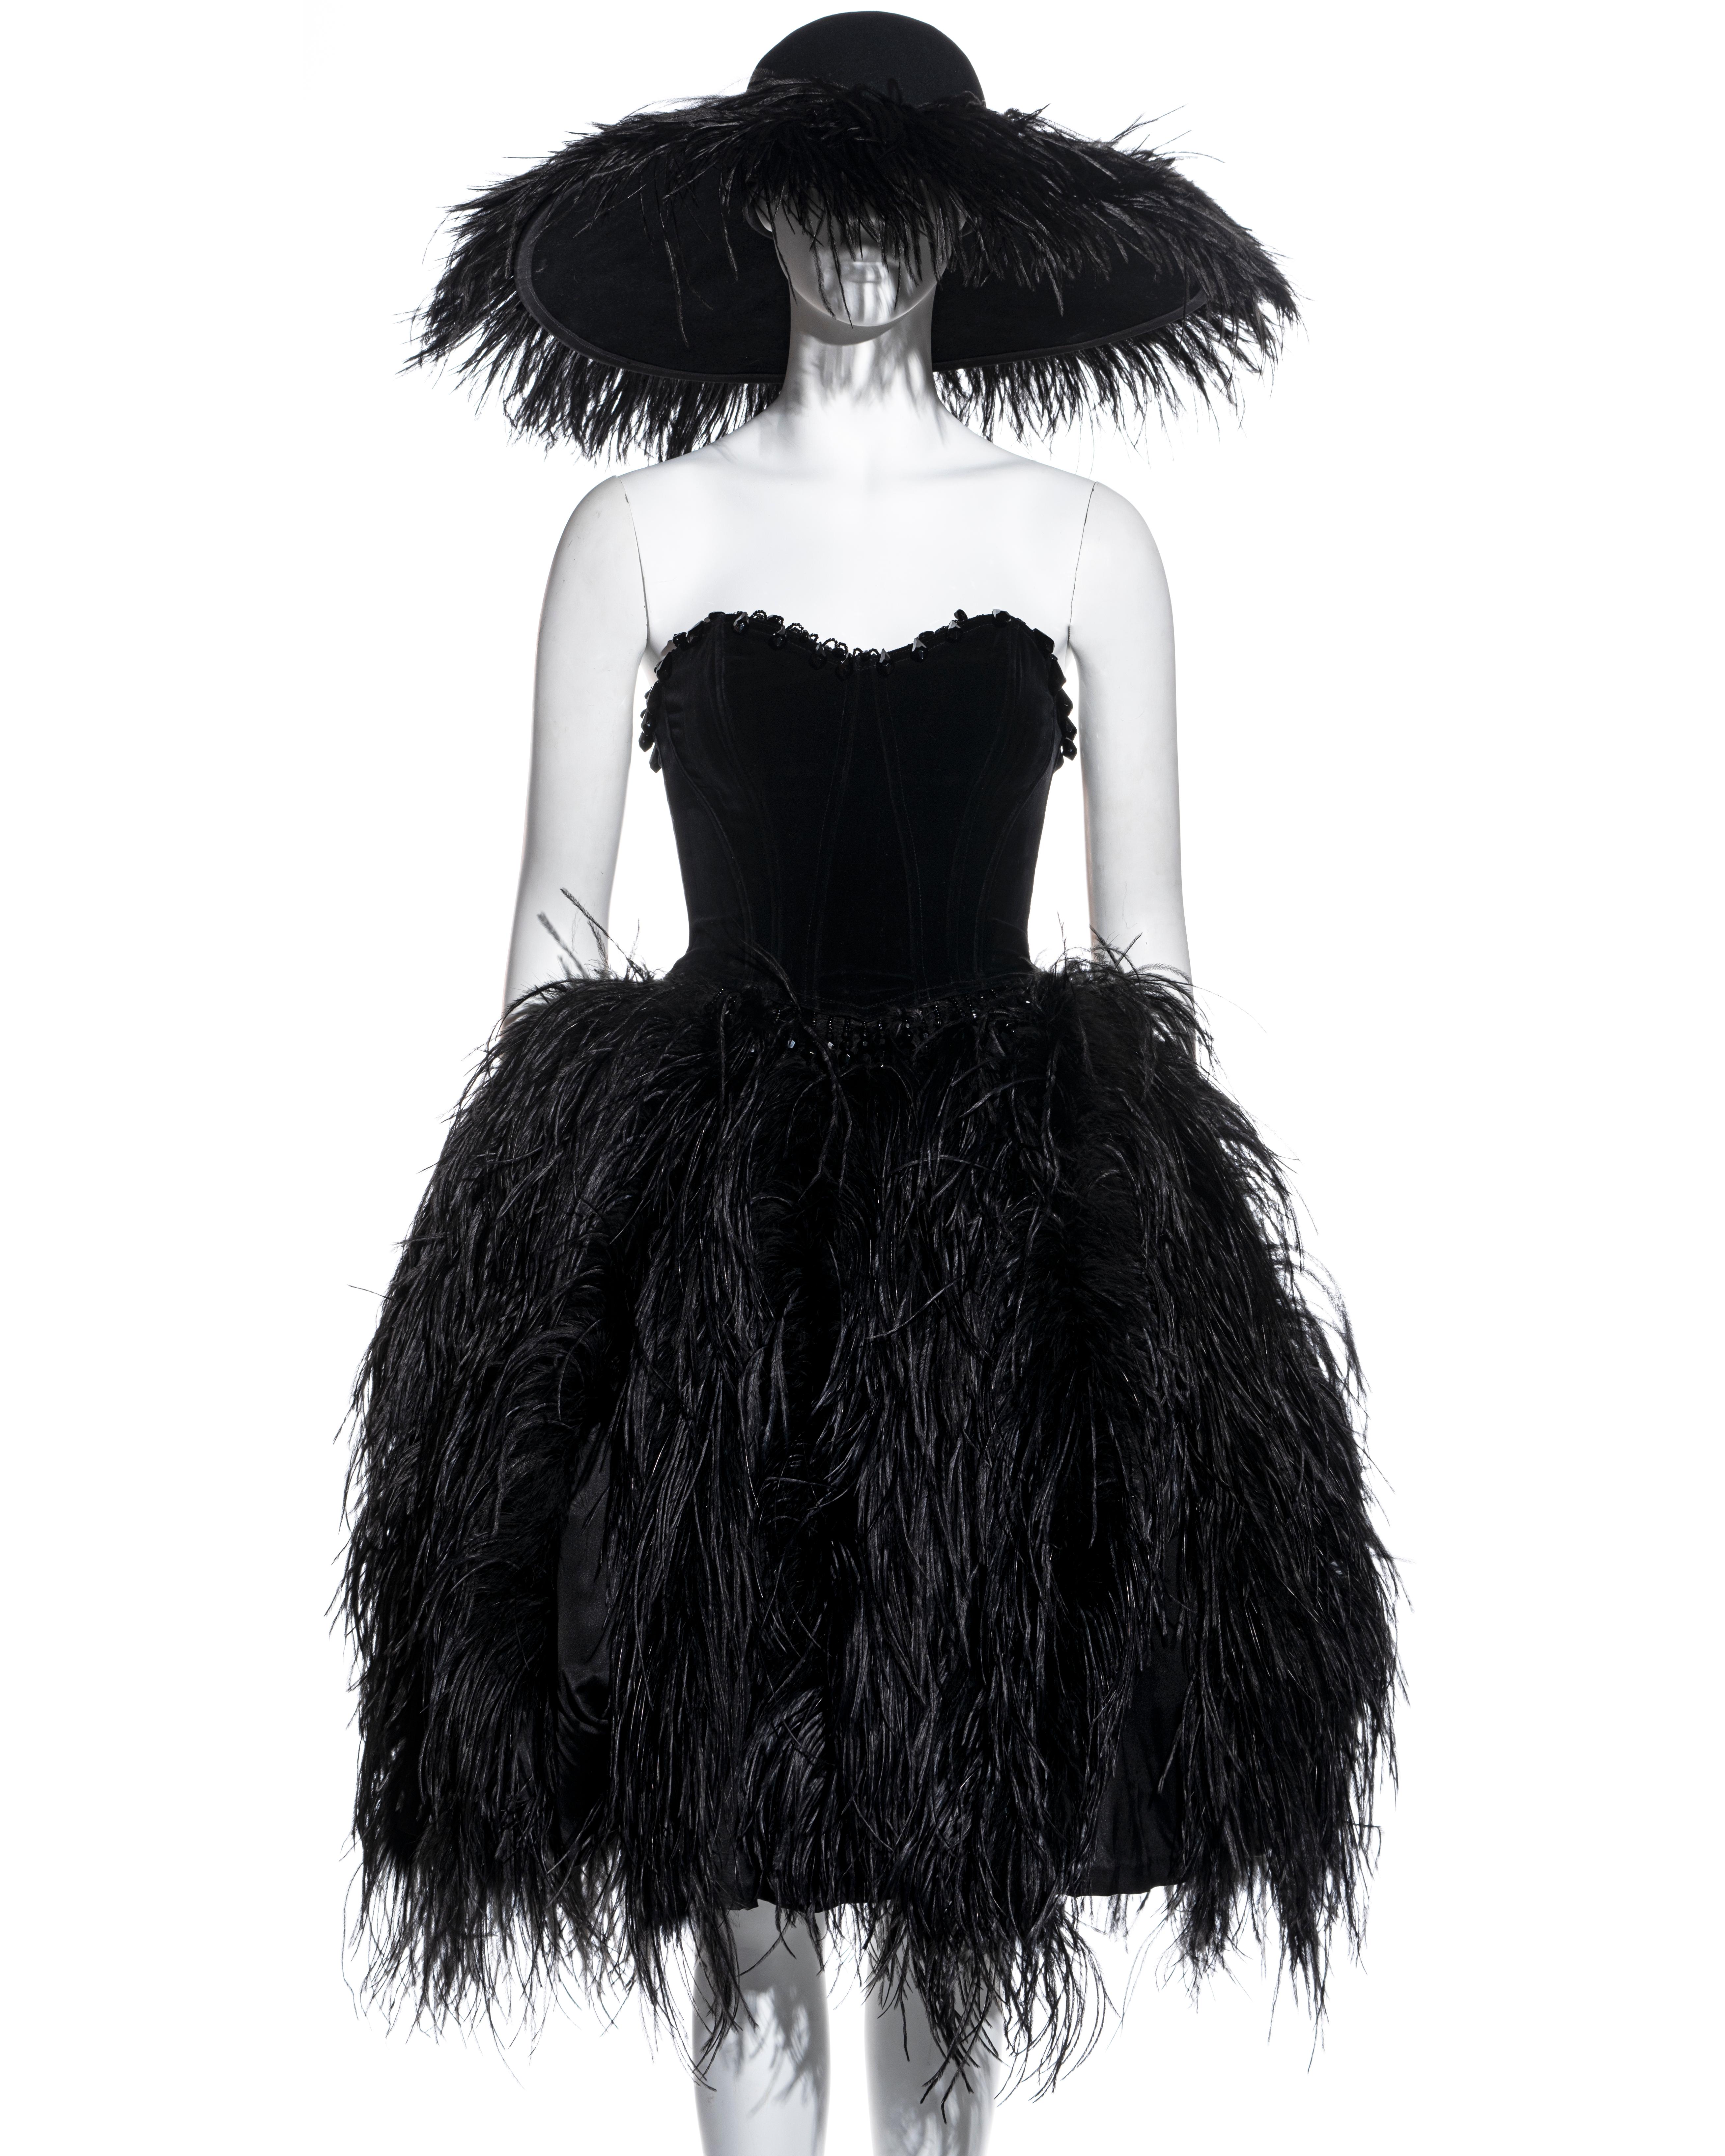 ▪ Chantal Thomass black ostrich feather 3 piece evening ensemble 
▪ Felt saucer hat with ostrich feathers around the brim 
▪ Velvet bustier corset with beaded tassel trim 
▪ Bell skit with ostrich feather and built-in tulle petticoat skirt
▪ Size